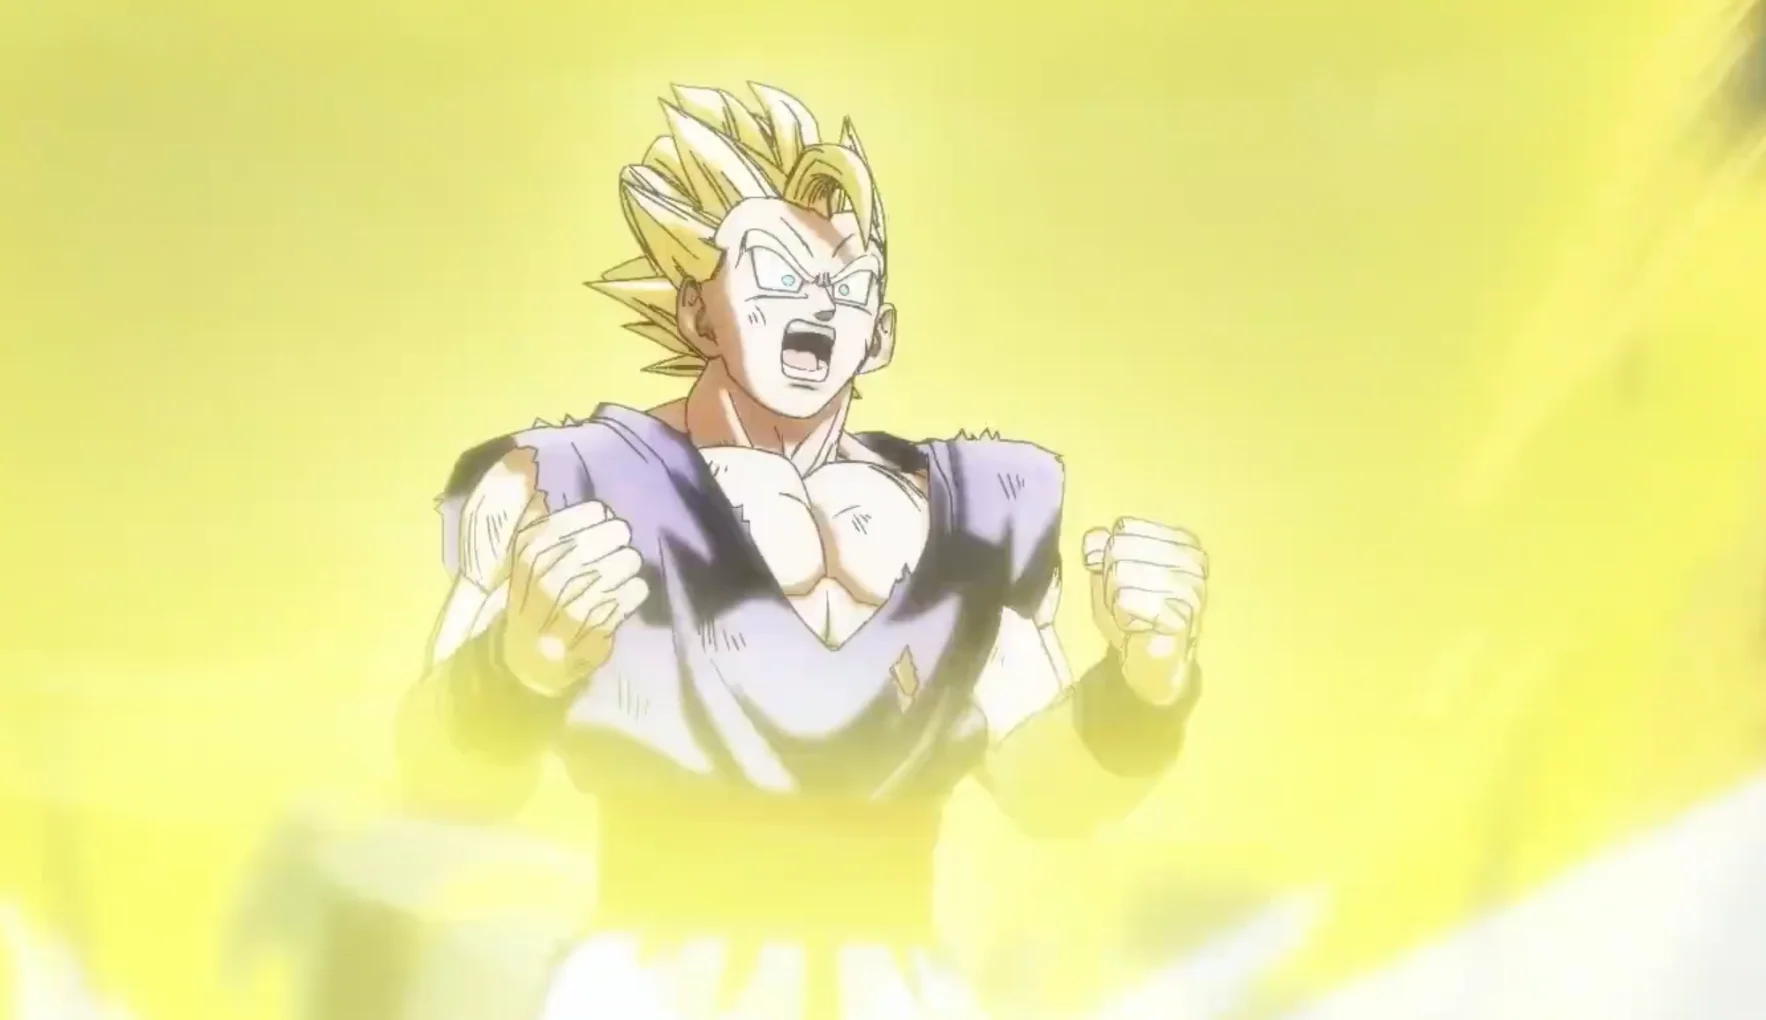 "Dragon Ball Super: Super Hero" Reveals Official Trailer for Northern America Edition